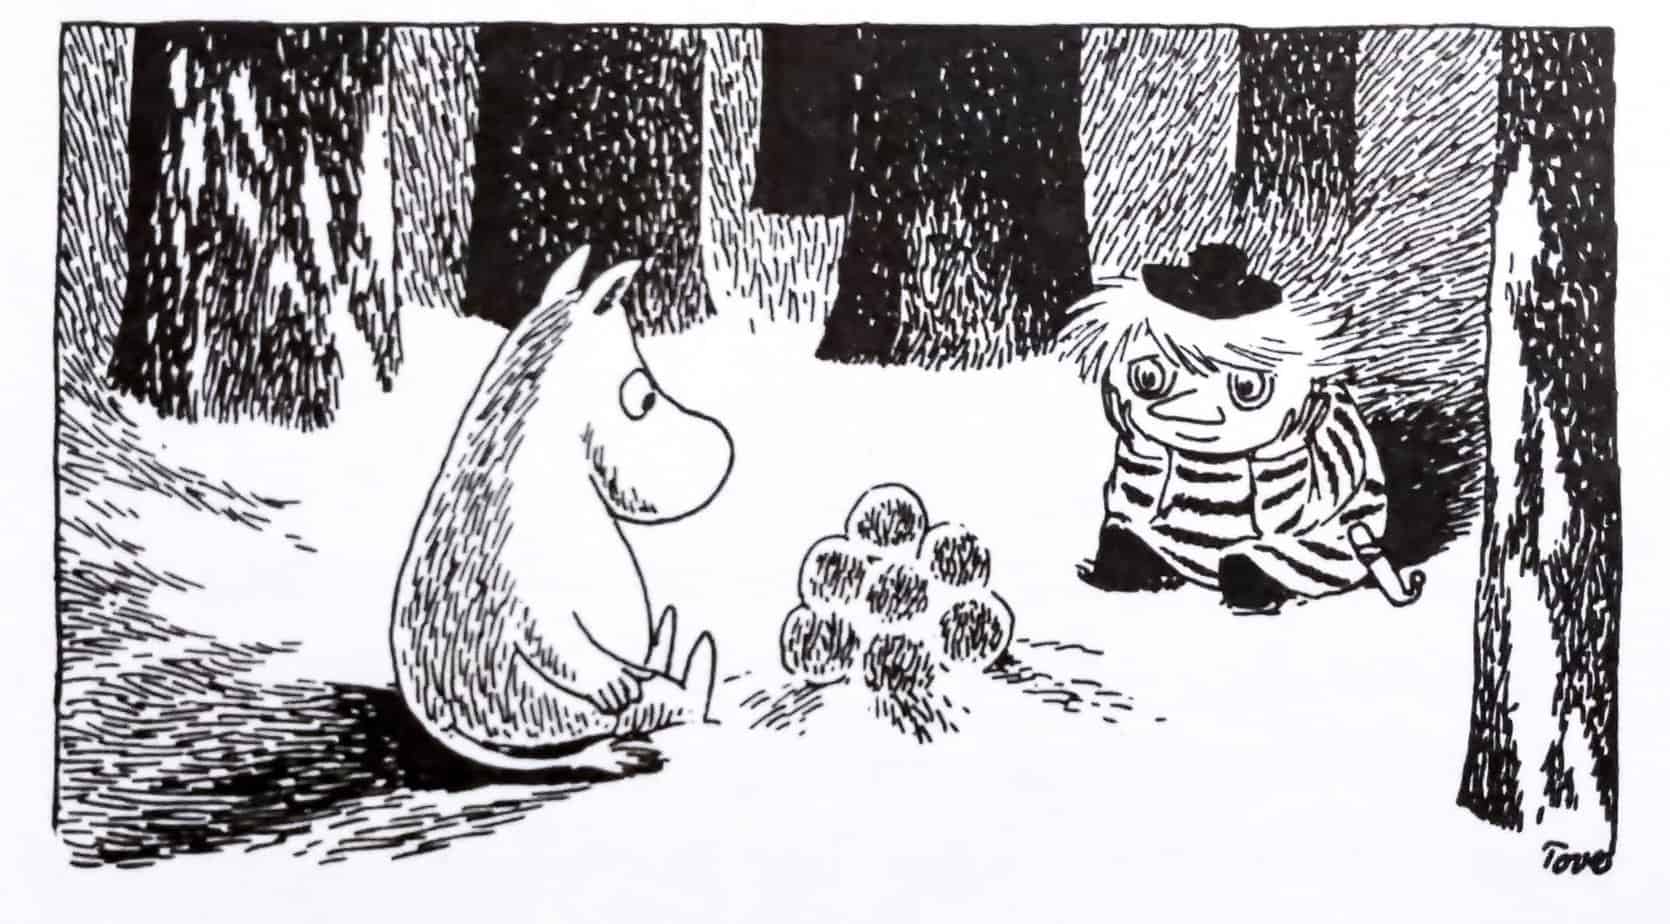 by Tove Jansson for 'Moominland Midwinter (1957) camp fire